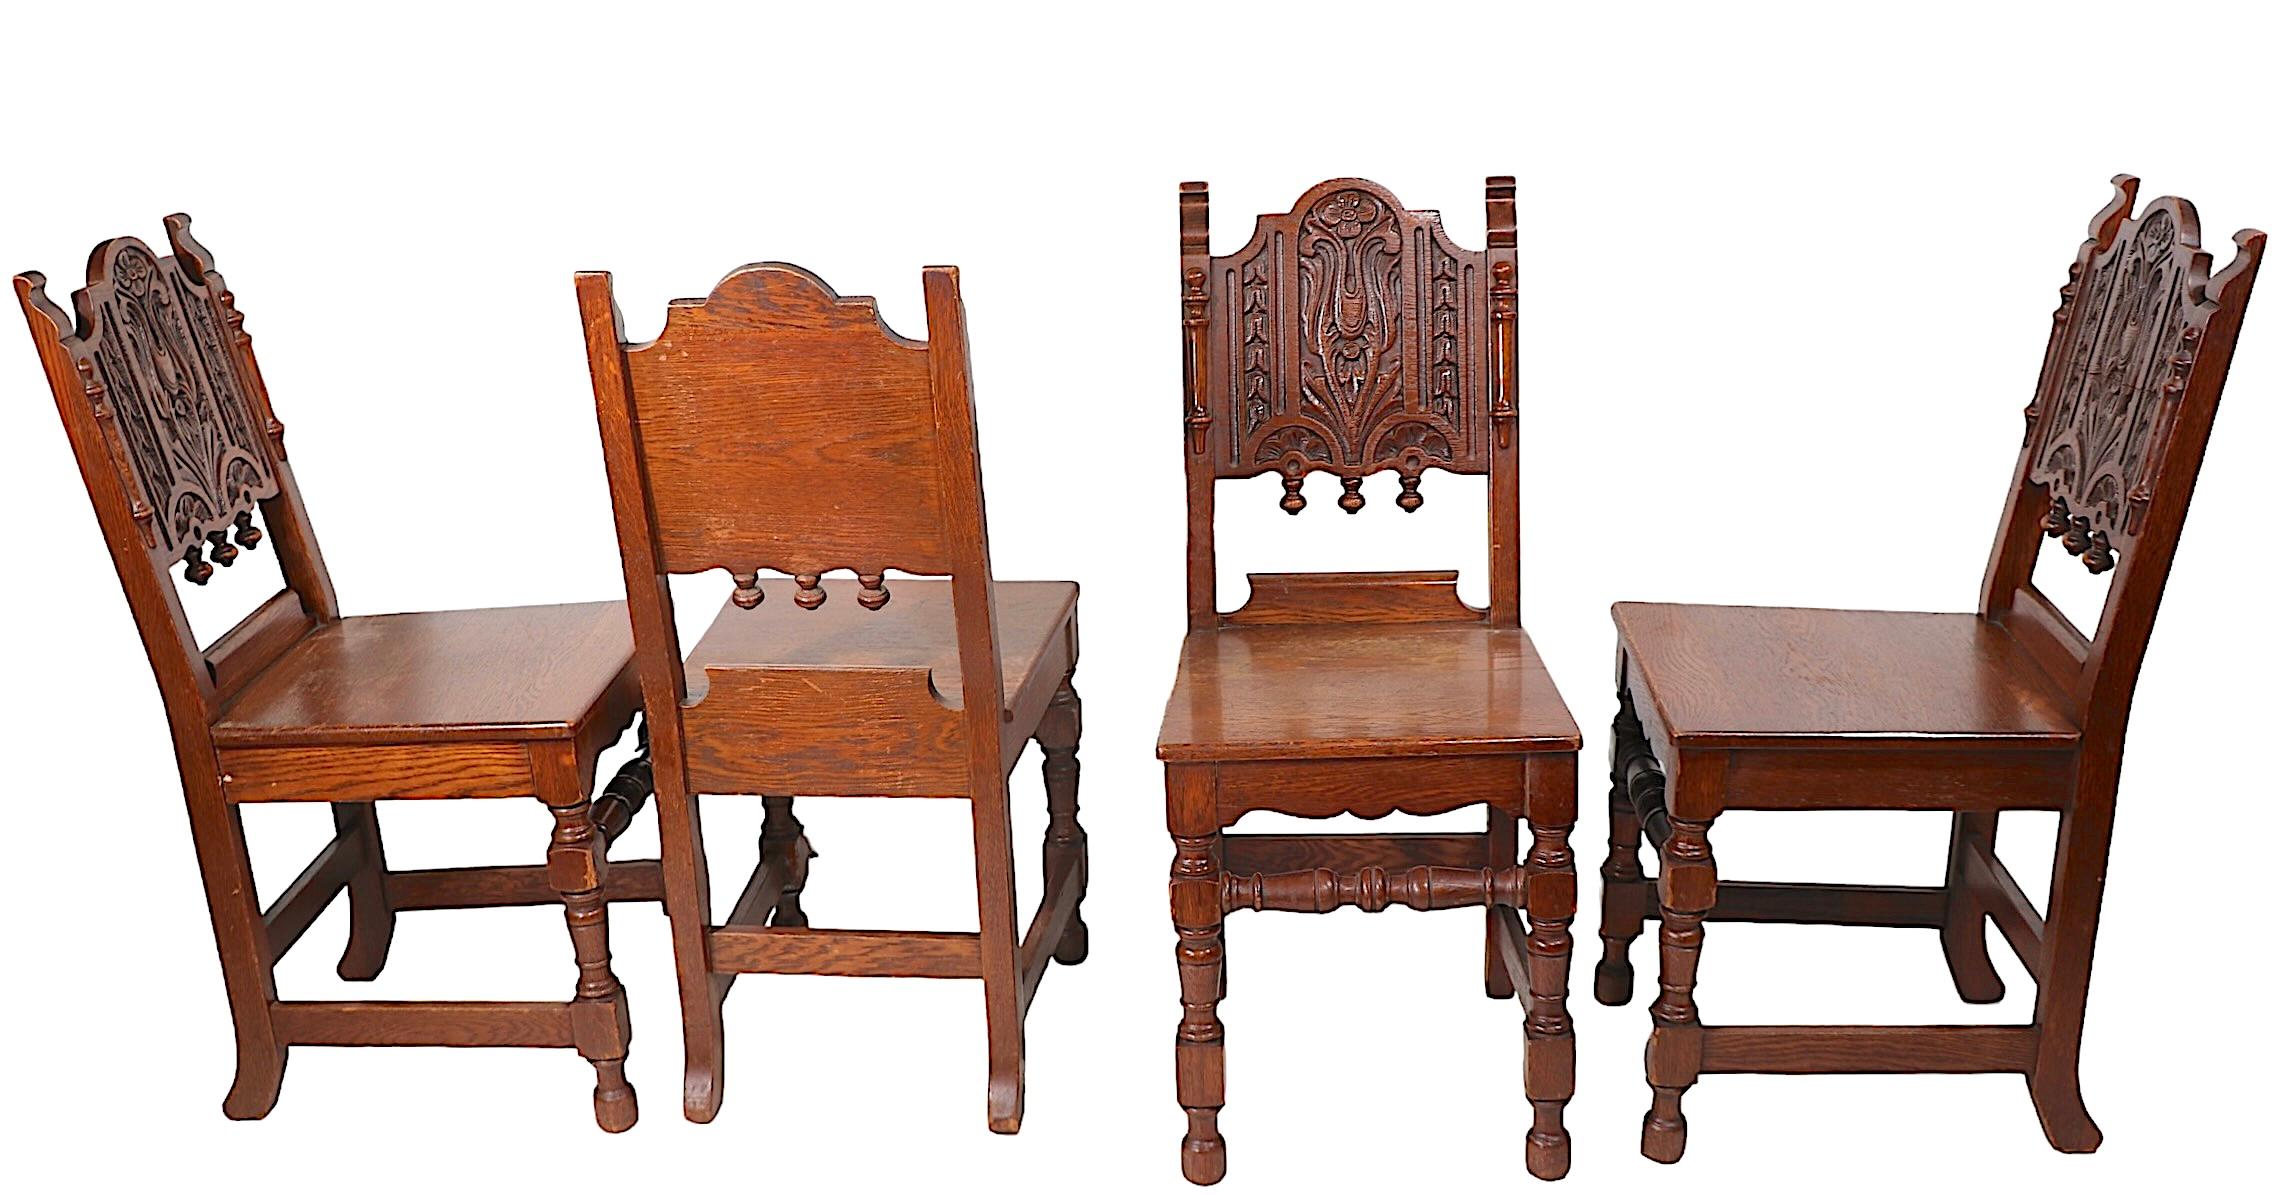 Charming set of four cafe dining chairs executed in solid oak, with intricately carved back rests, and turned legs.  Jacobean revival in  style, circa 1920's, probably made in England, unsigned. The chairs are all in very good, original, clean and